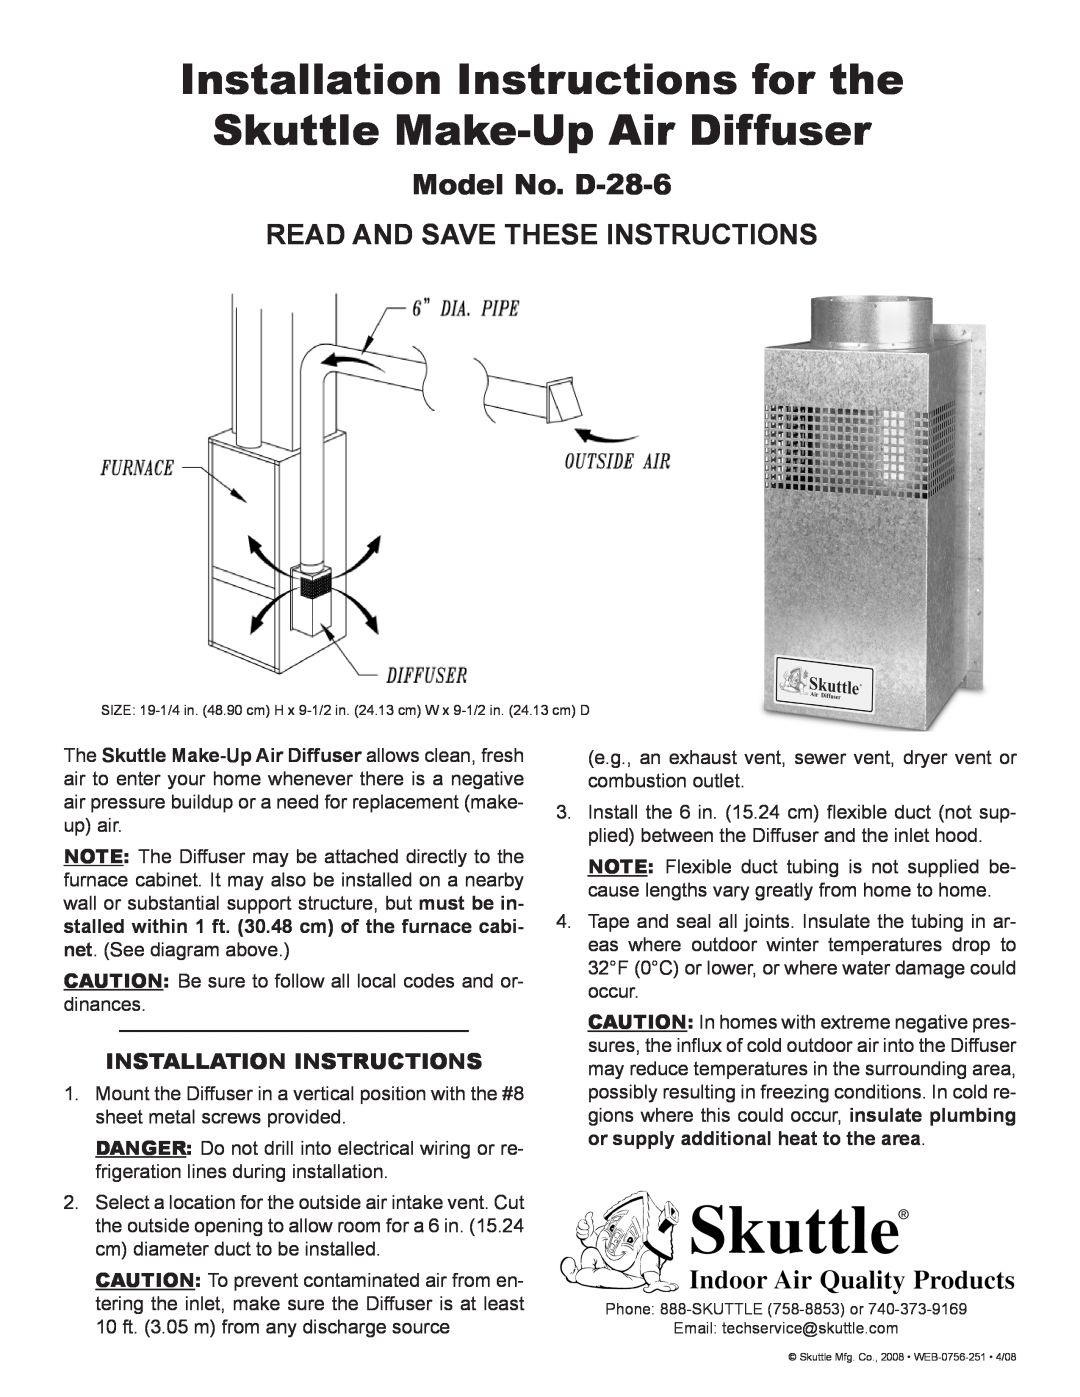 Skuttle Indoor Air Quality Products installation instructions Model No. D-28-6 READ AND SAVE THESE INSTRUCTIONS 